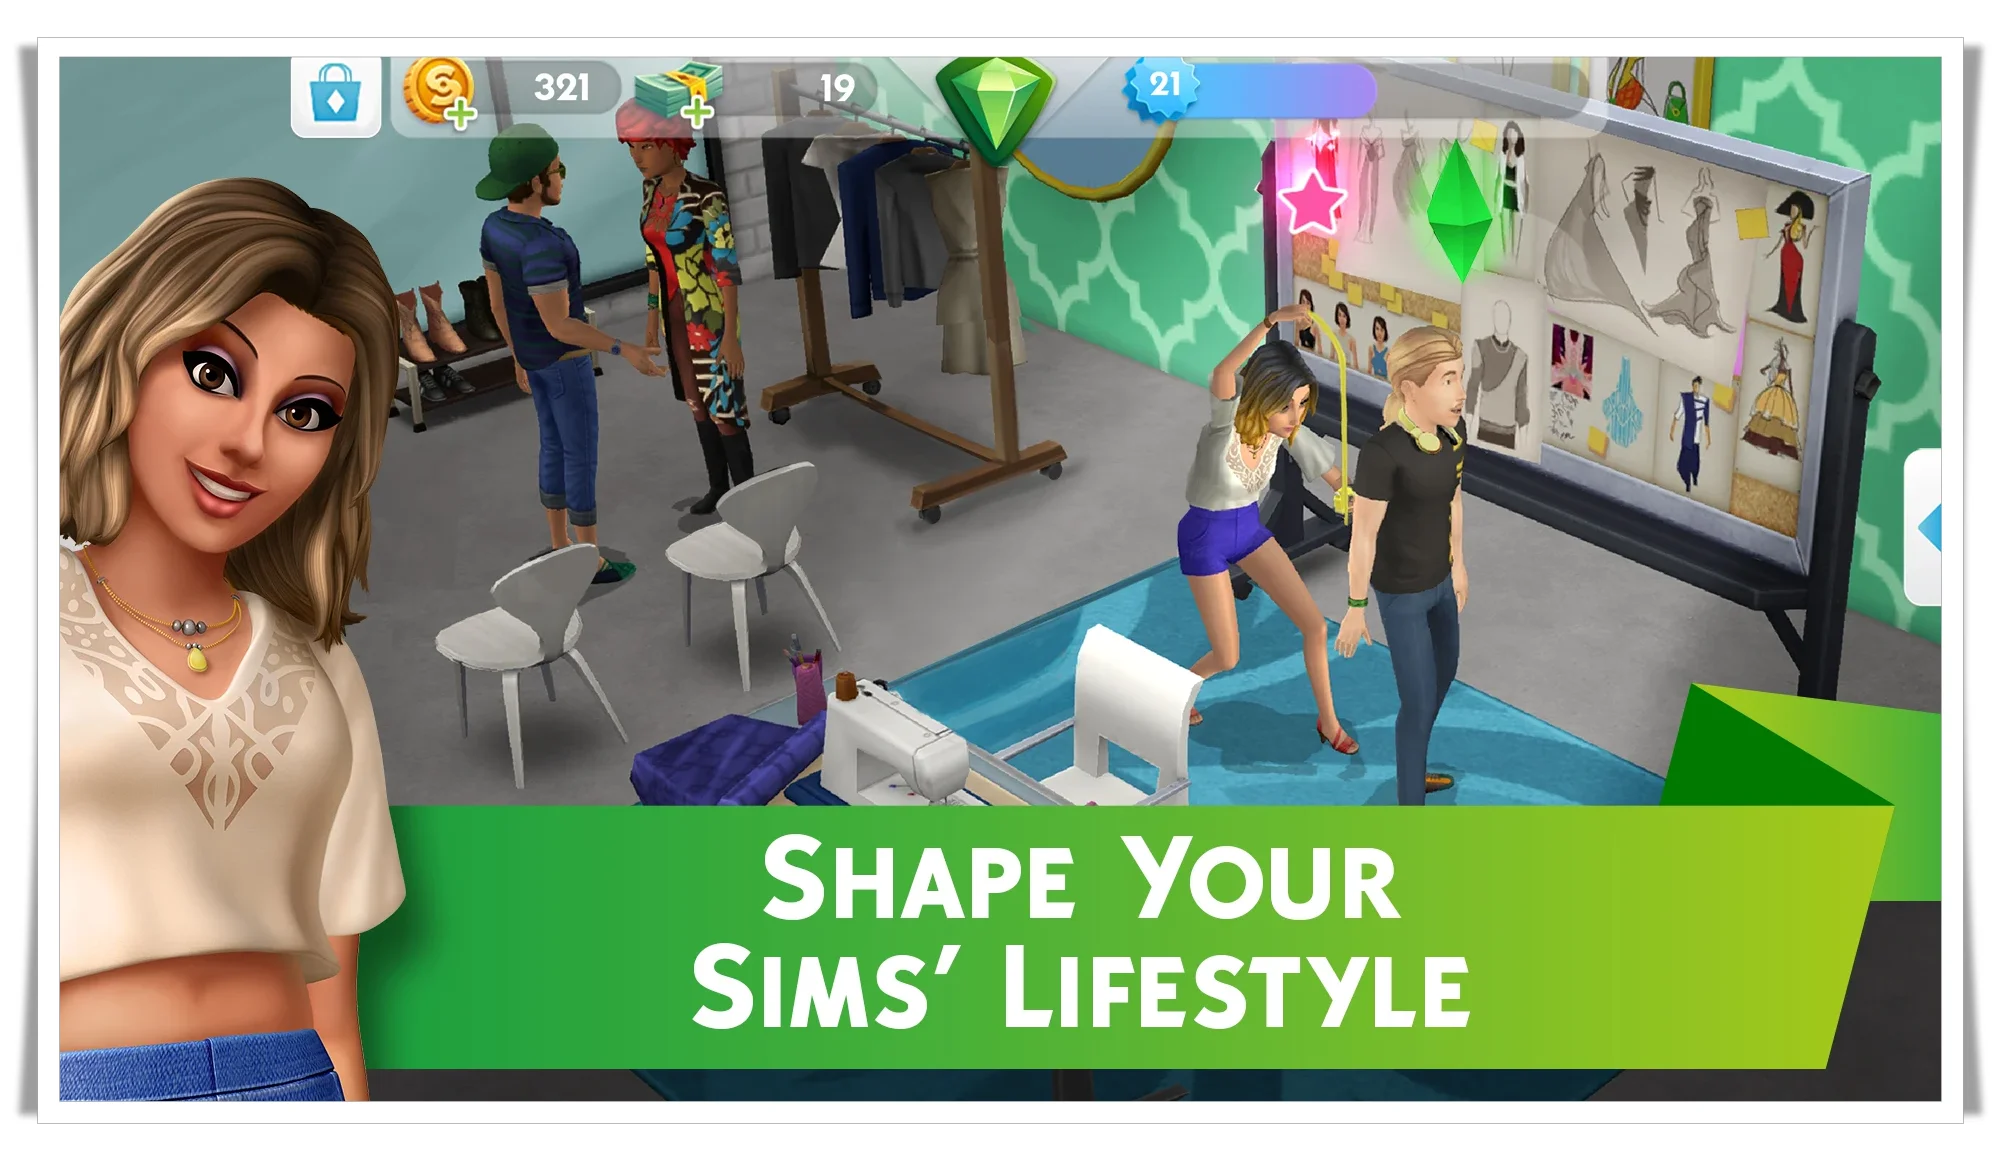 Life is a Game MOD APK 2.4.24 (Unlimited Money) for Android